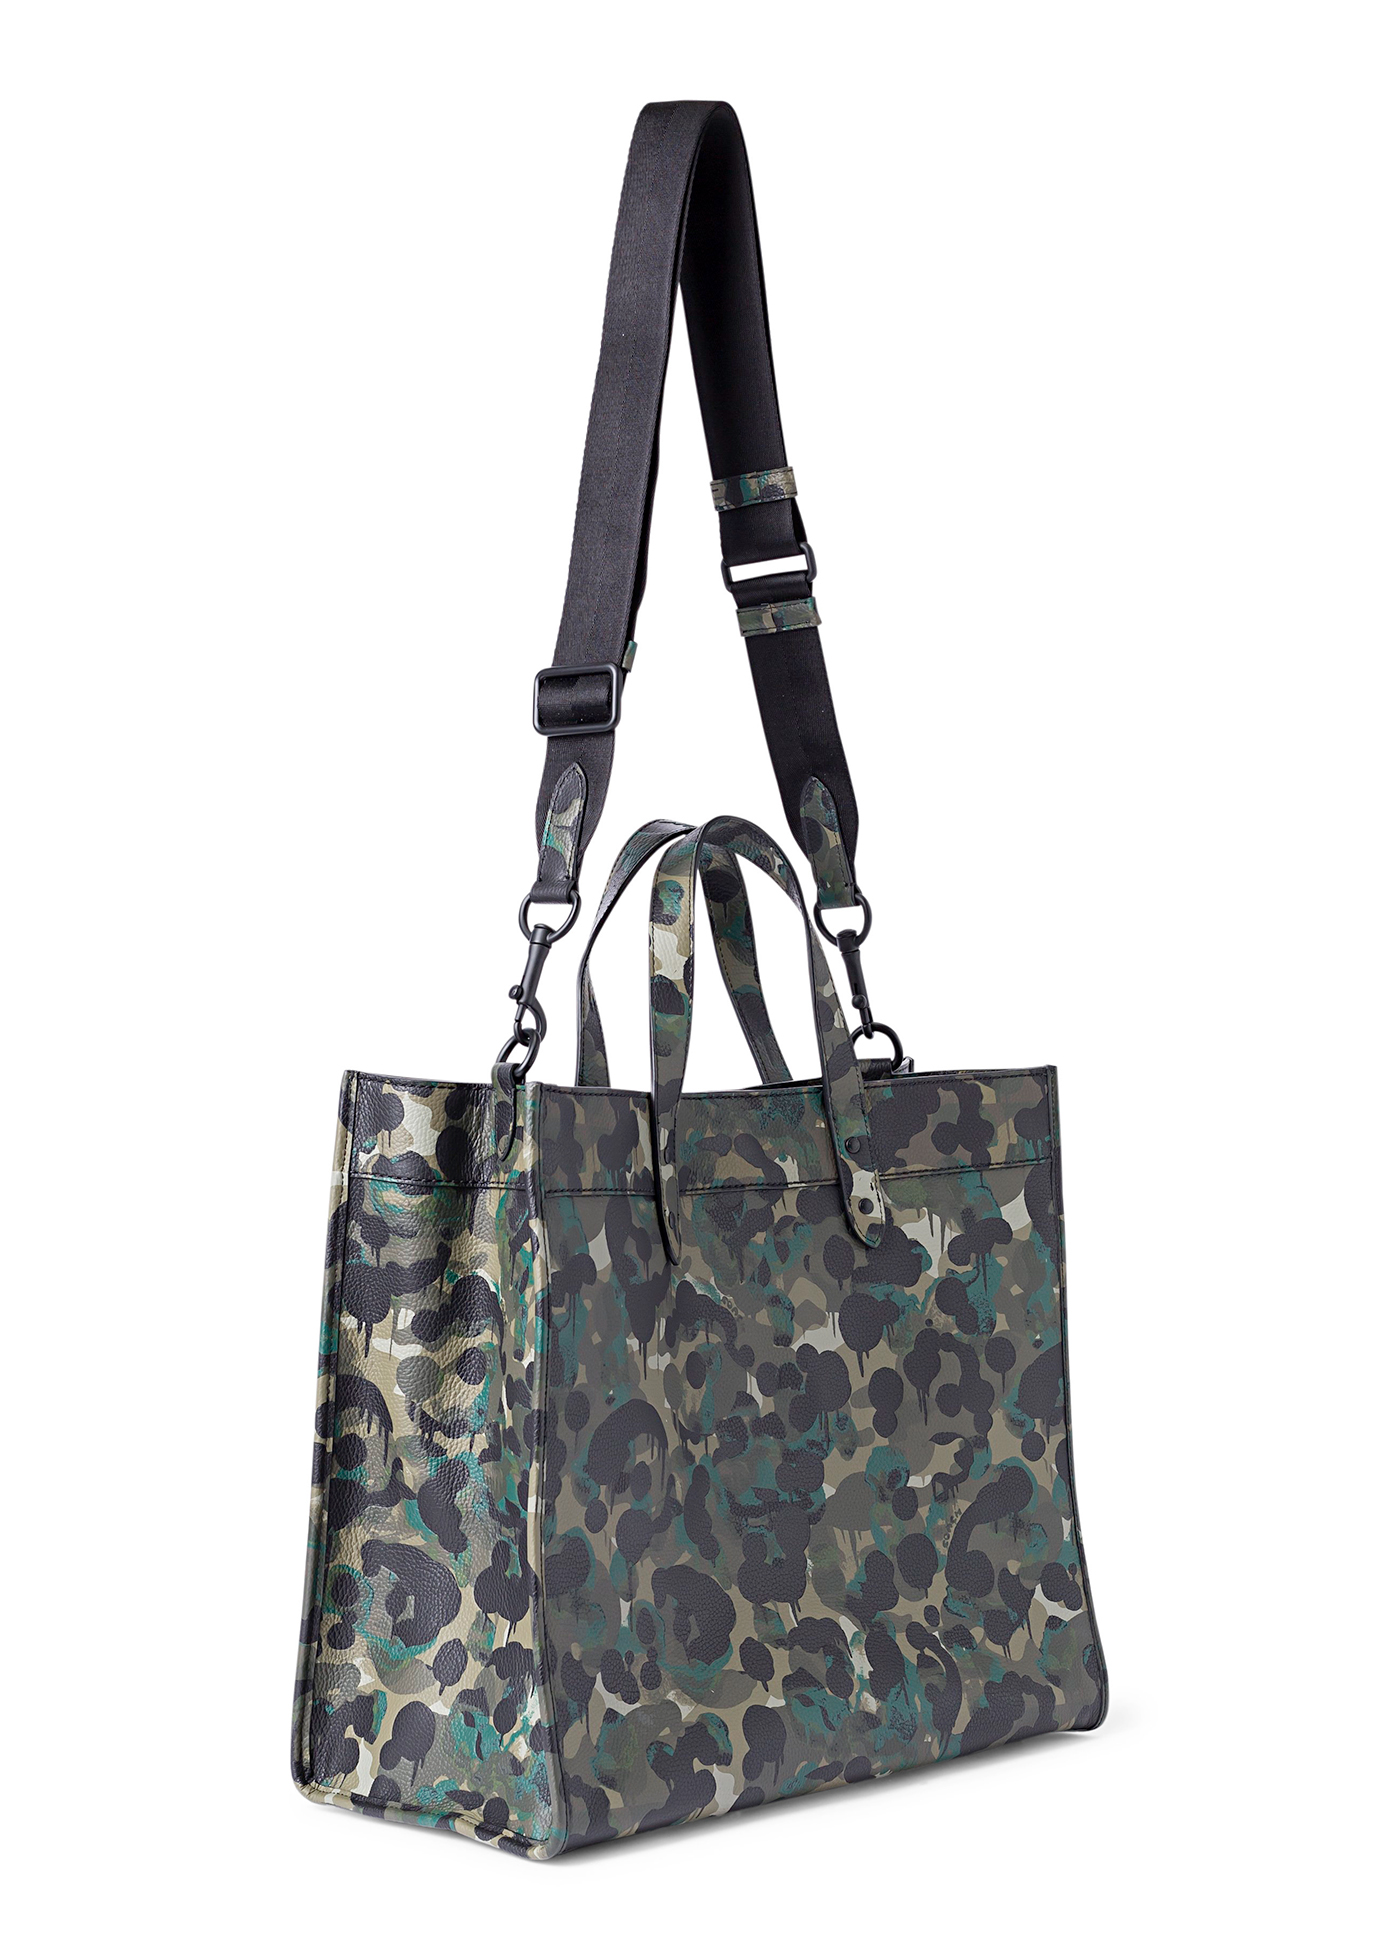 Field Tote 40 in Camo Print Leather image number 1